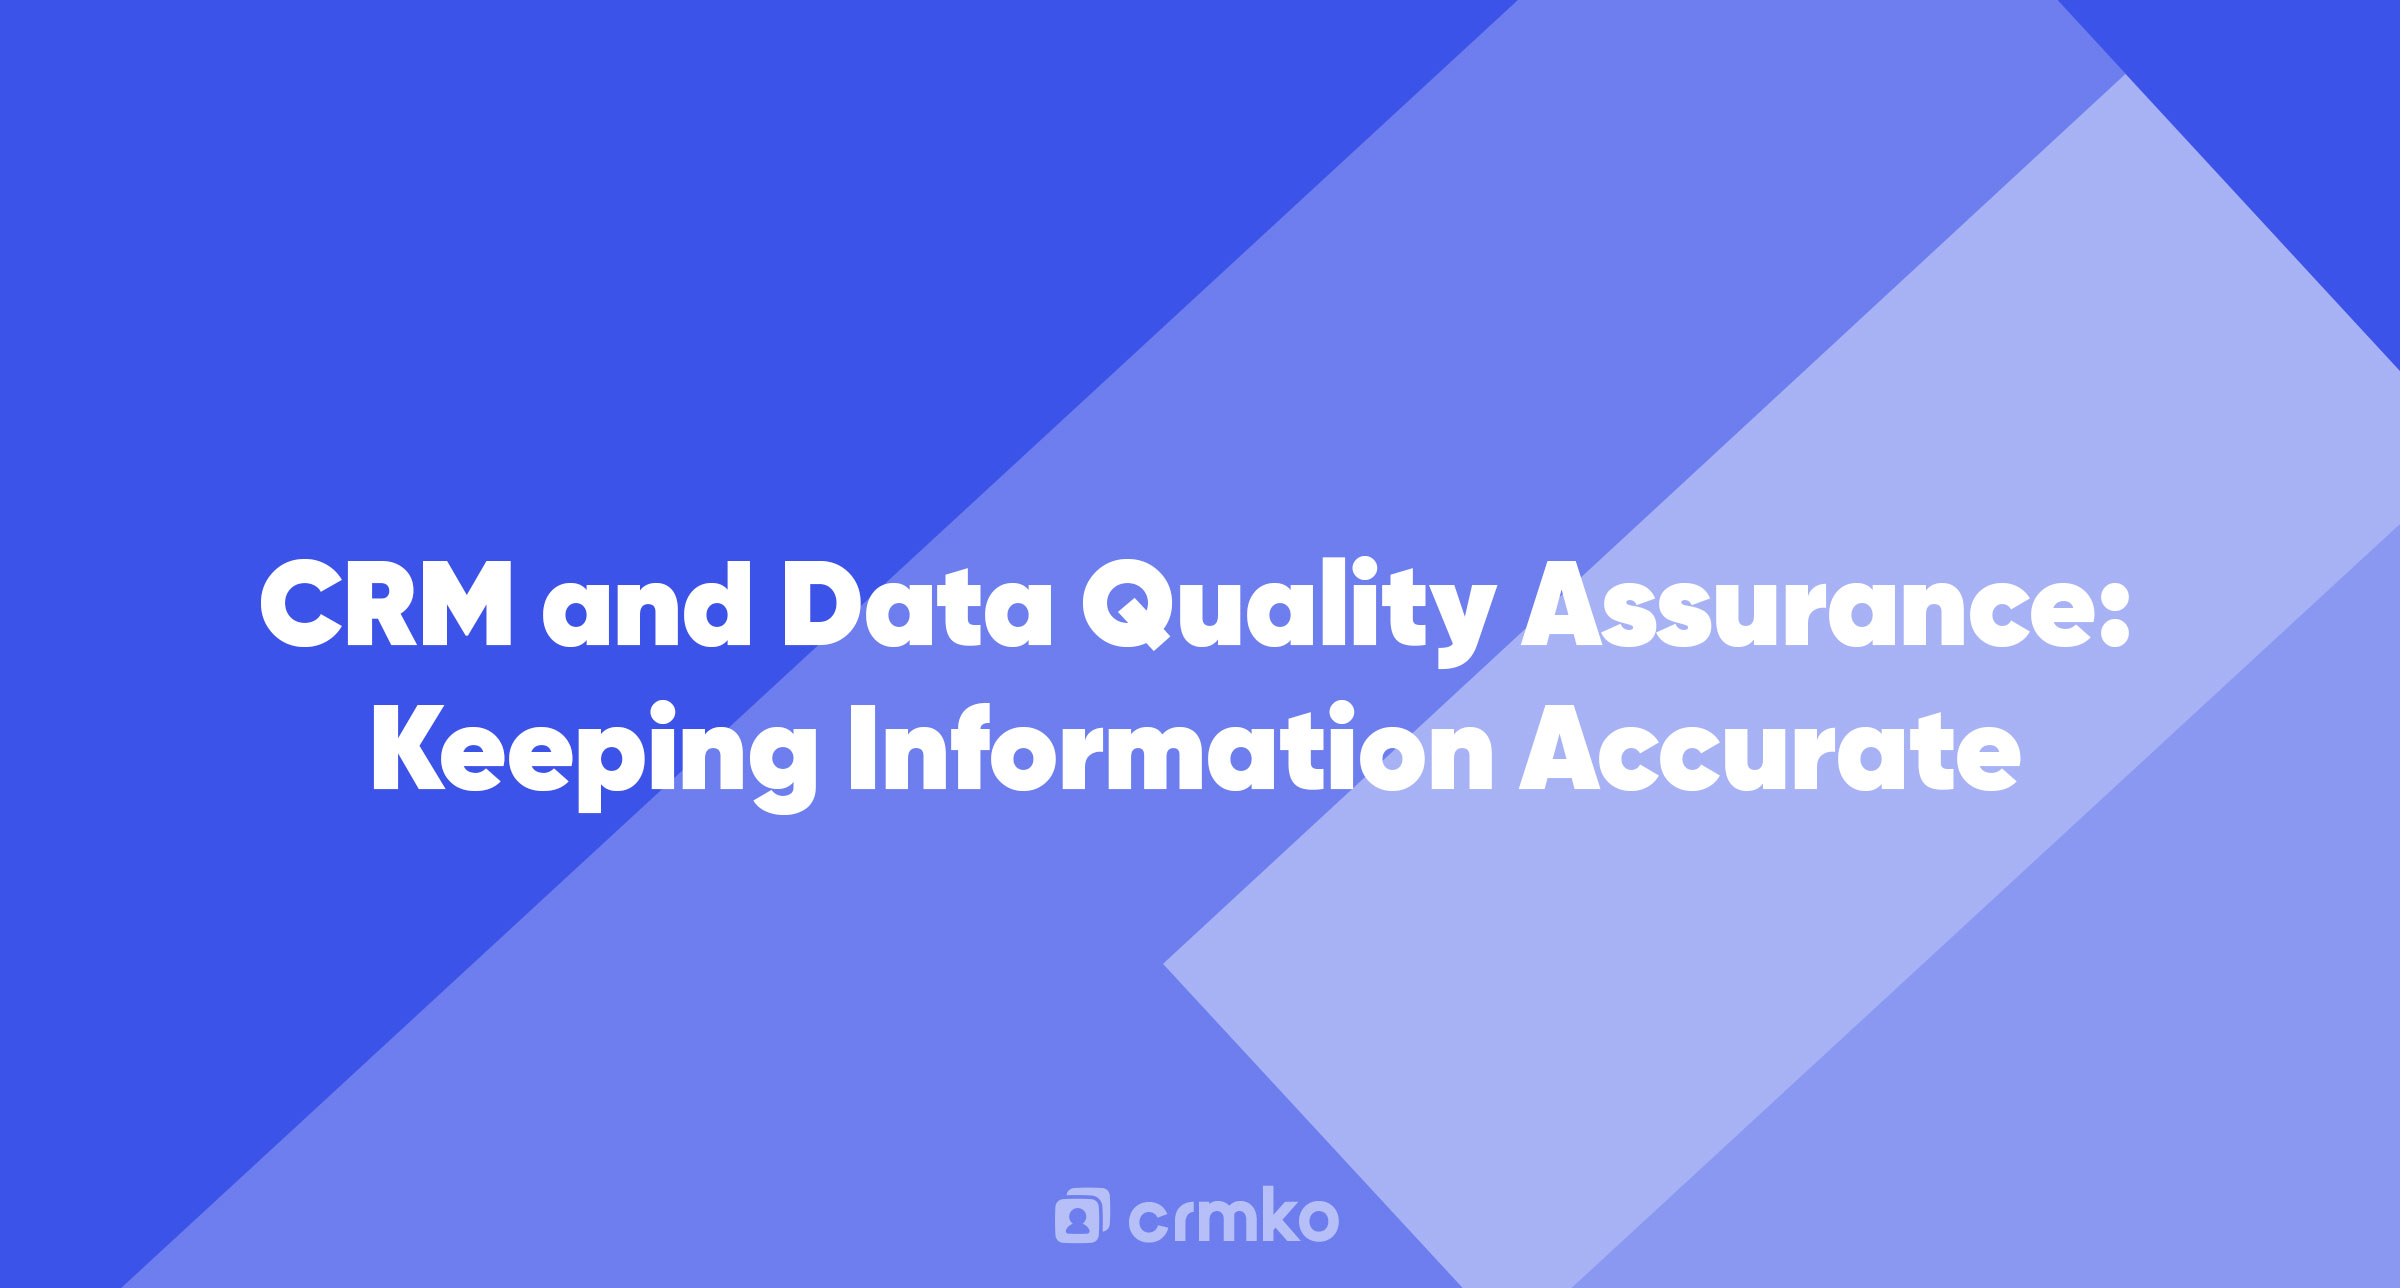 Article | CRM and Data Quality Assurance: Keeping Information Accurate